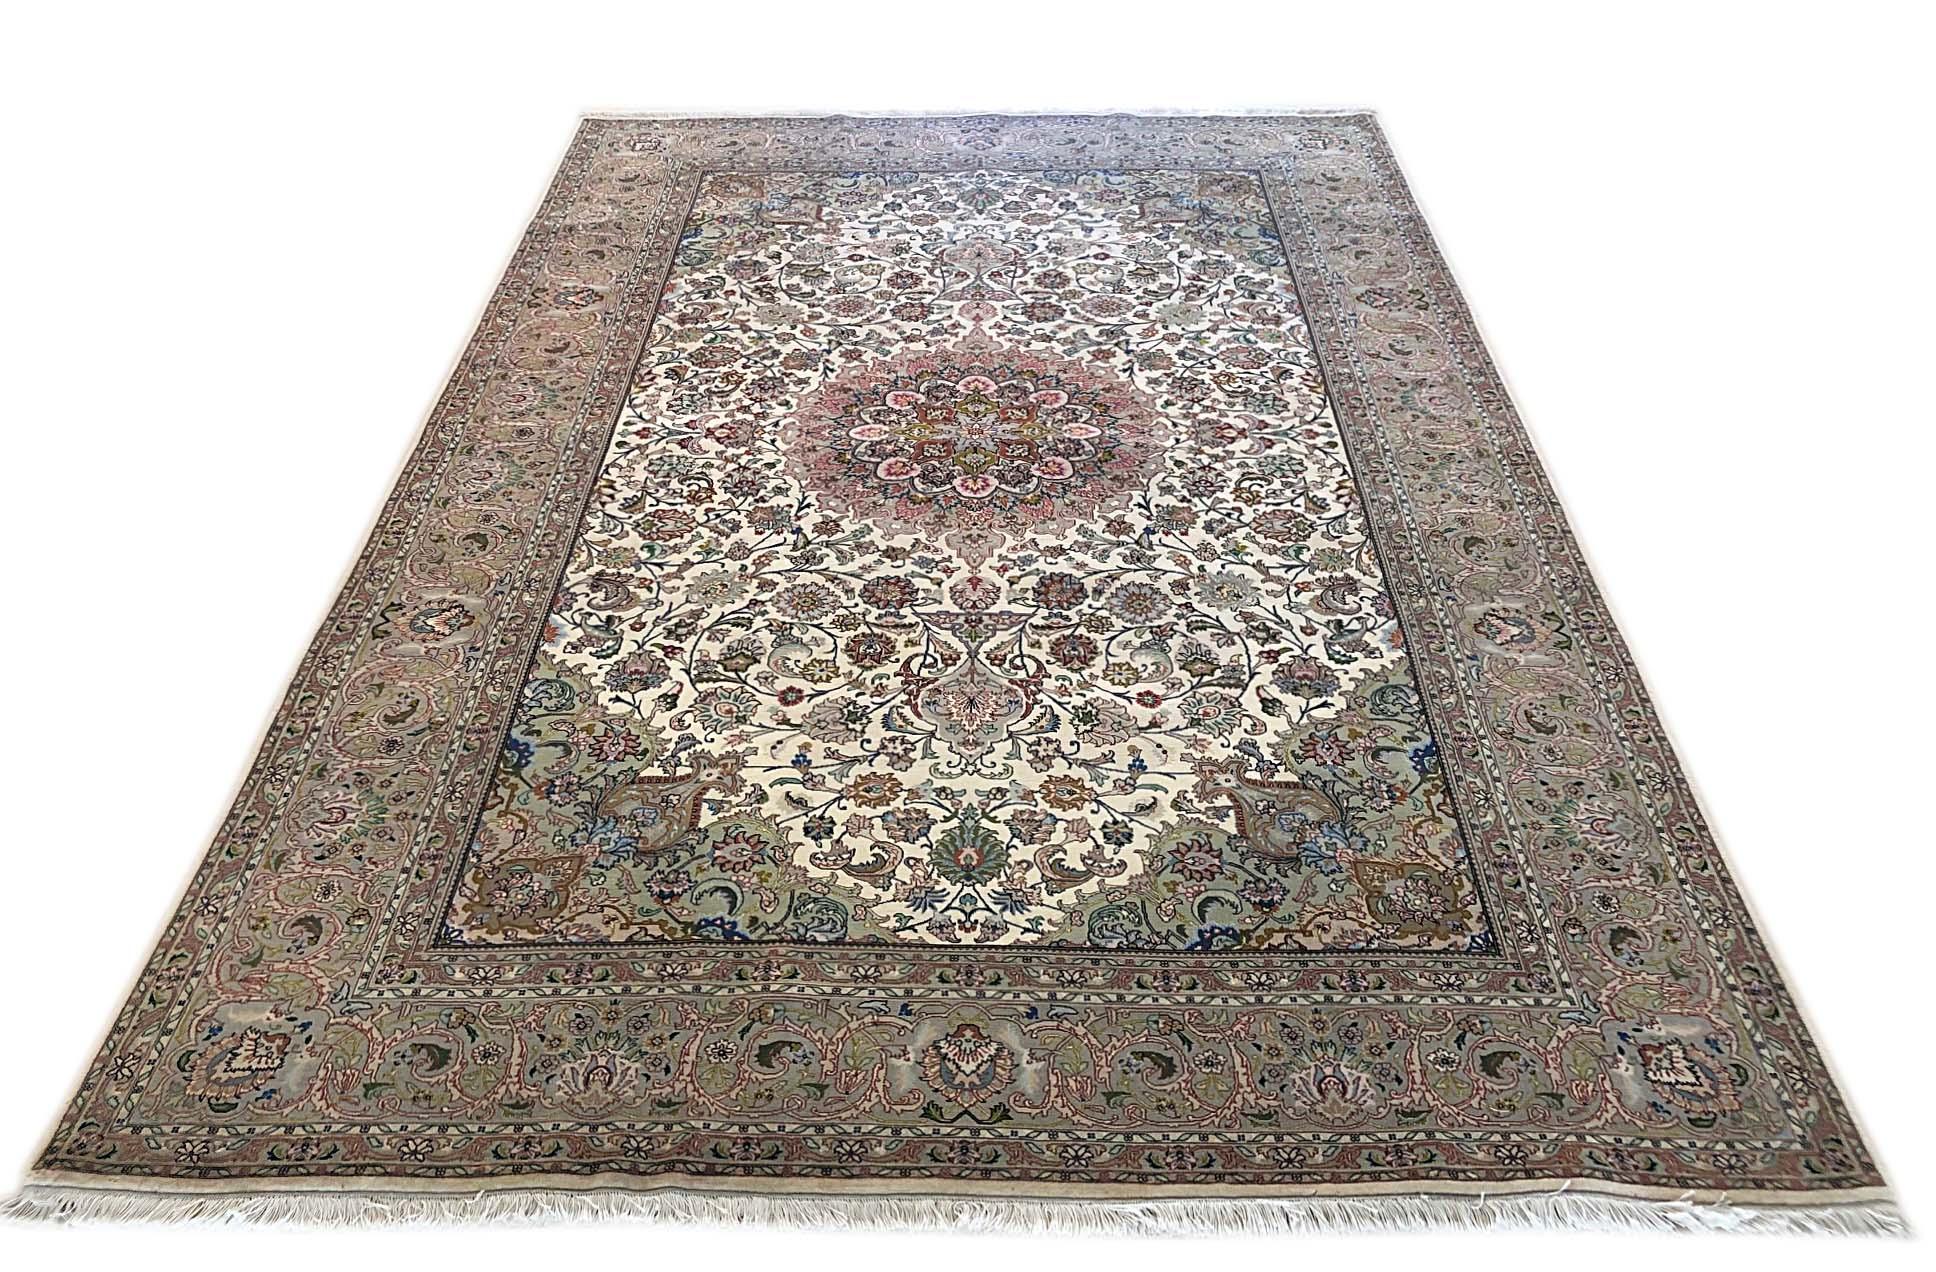 This Persian Tabriz rug has wool and silk pile and cotton foundation. This beautiful rug features a floral rug pattern that defines the elements in a unique way. The base color is cream and border is taupe. The size is 6 feet 6 inches wide and 10